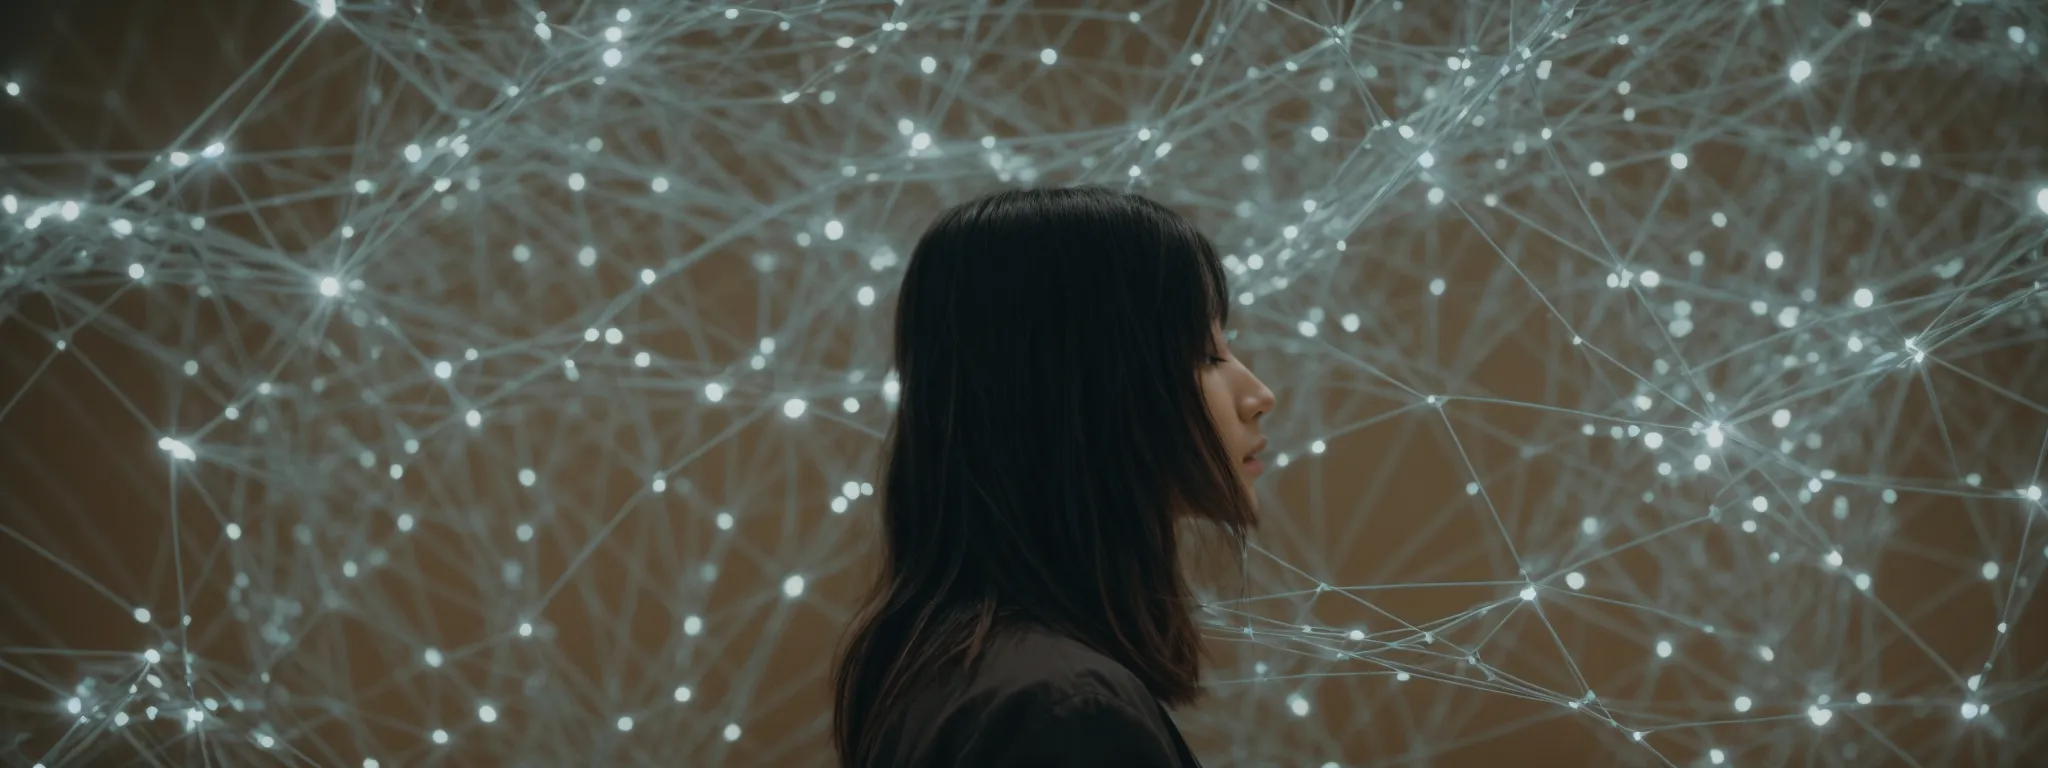 a person interacting with a giant, abstract representation of a search engine interface amidst a network of interconnected digital nodes.